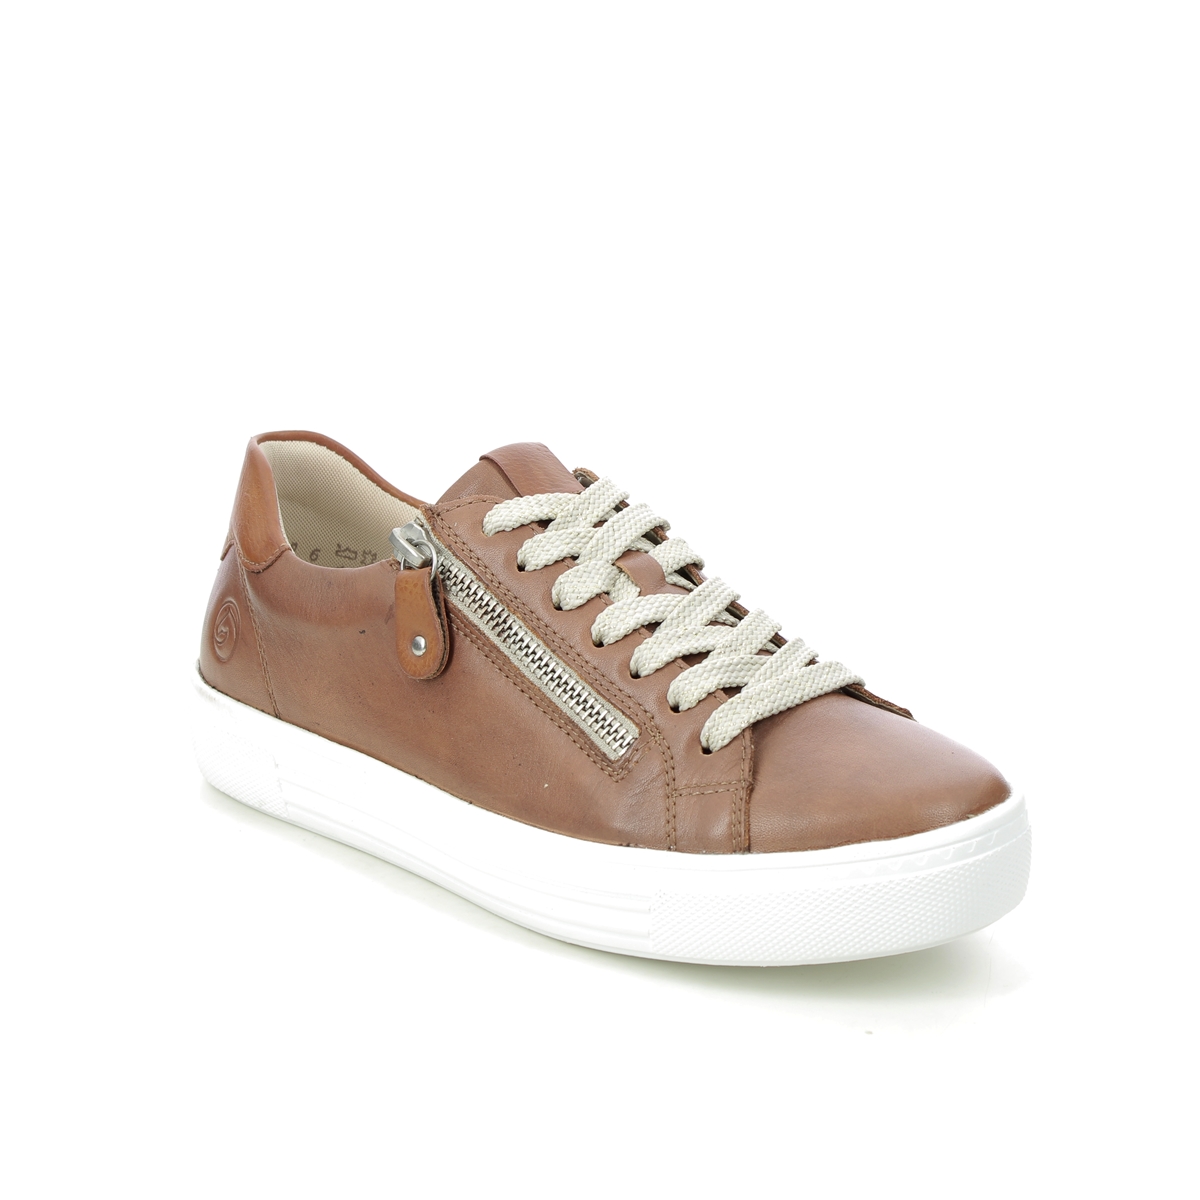 Remonte Altozip Tan Leather Womens Trainers D0903-24 In Size 36 In Plain Tan Leather